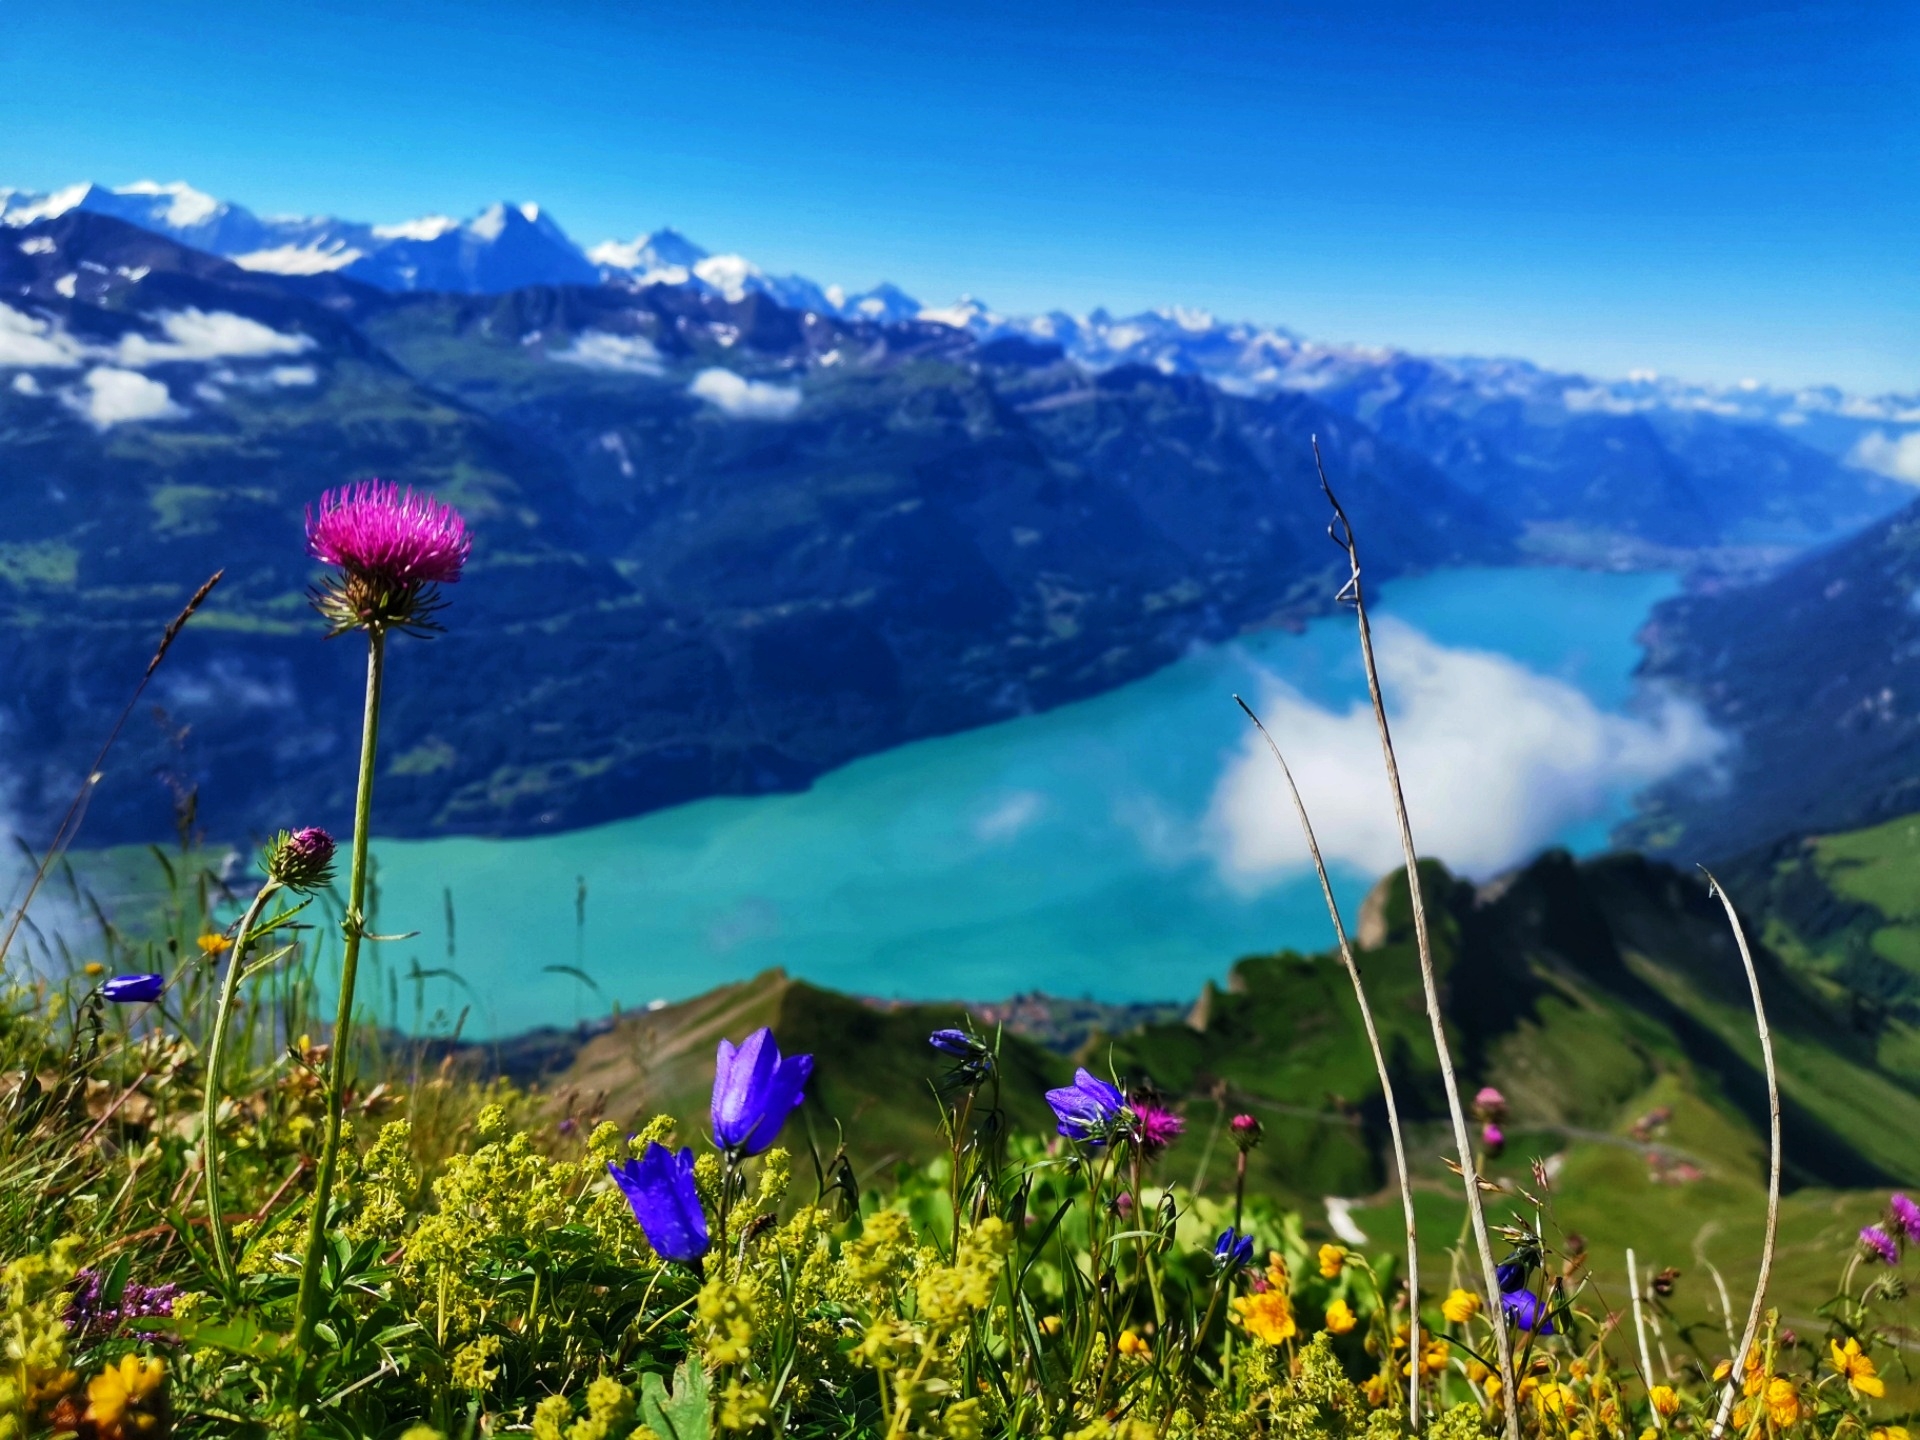 900 (c) A picture book view. Lake Brienz enchants you at the foot of Eiger, Mönch and Jungfrau (c) Ariane Schild